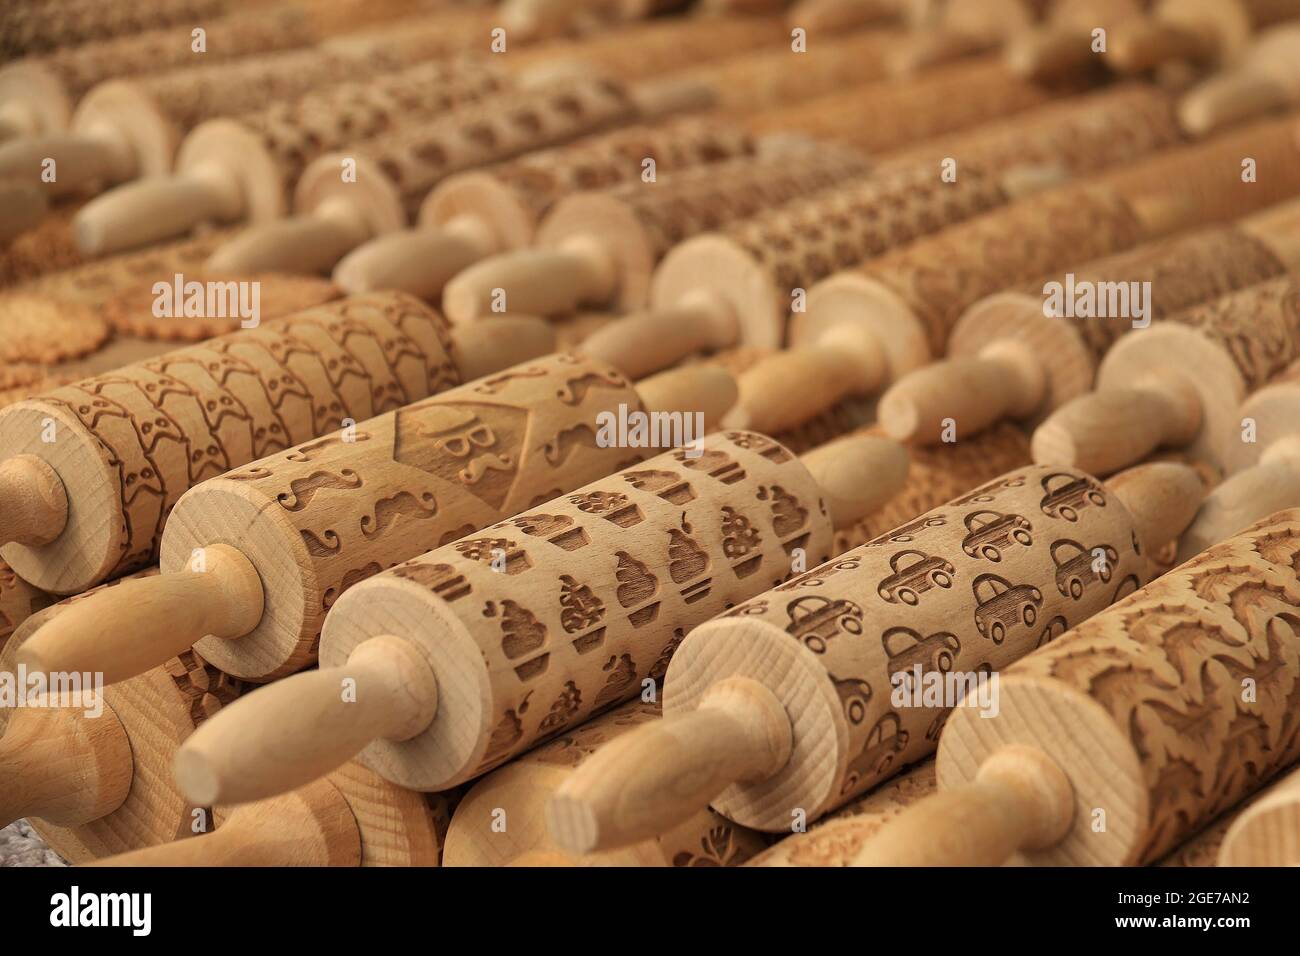 A display of wooden rolling pins with various designs Stock Photo - Alamy